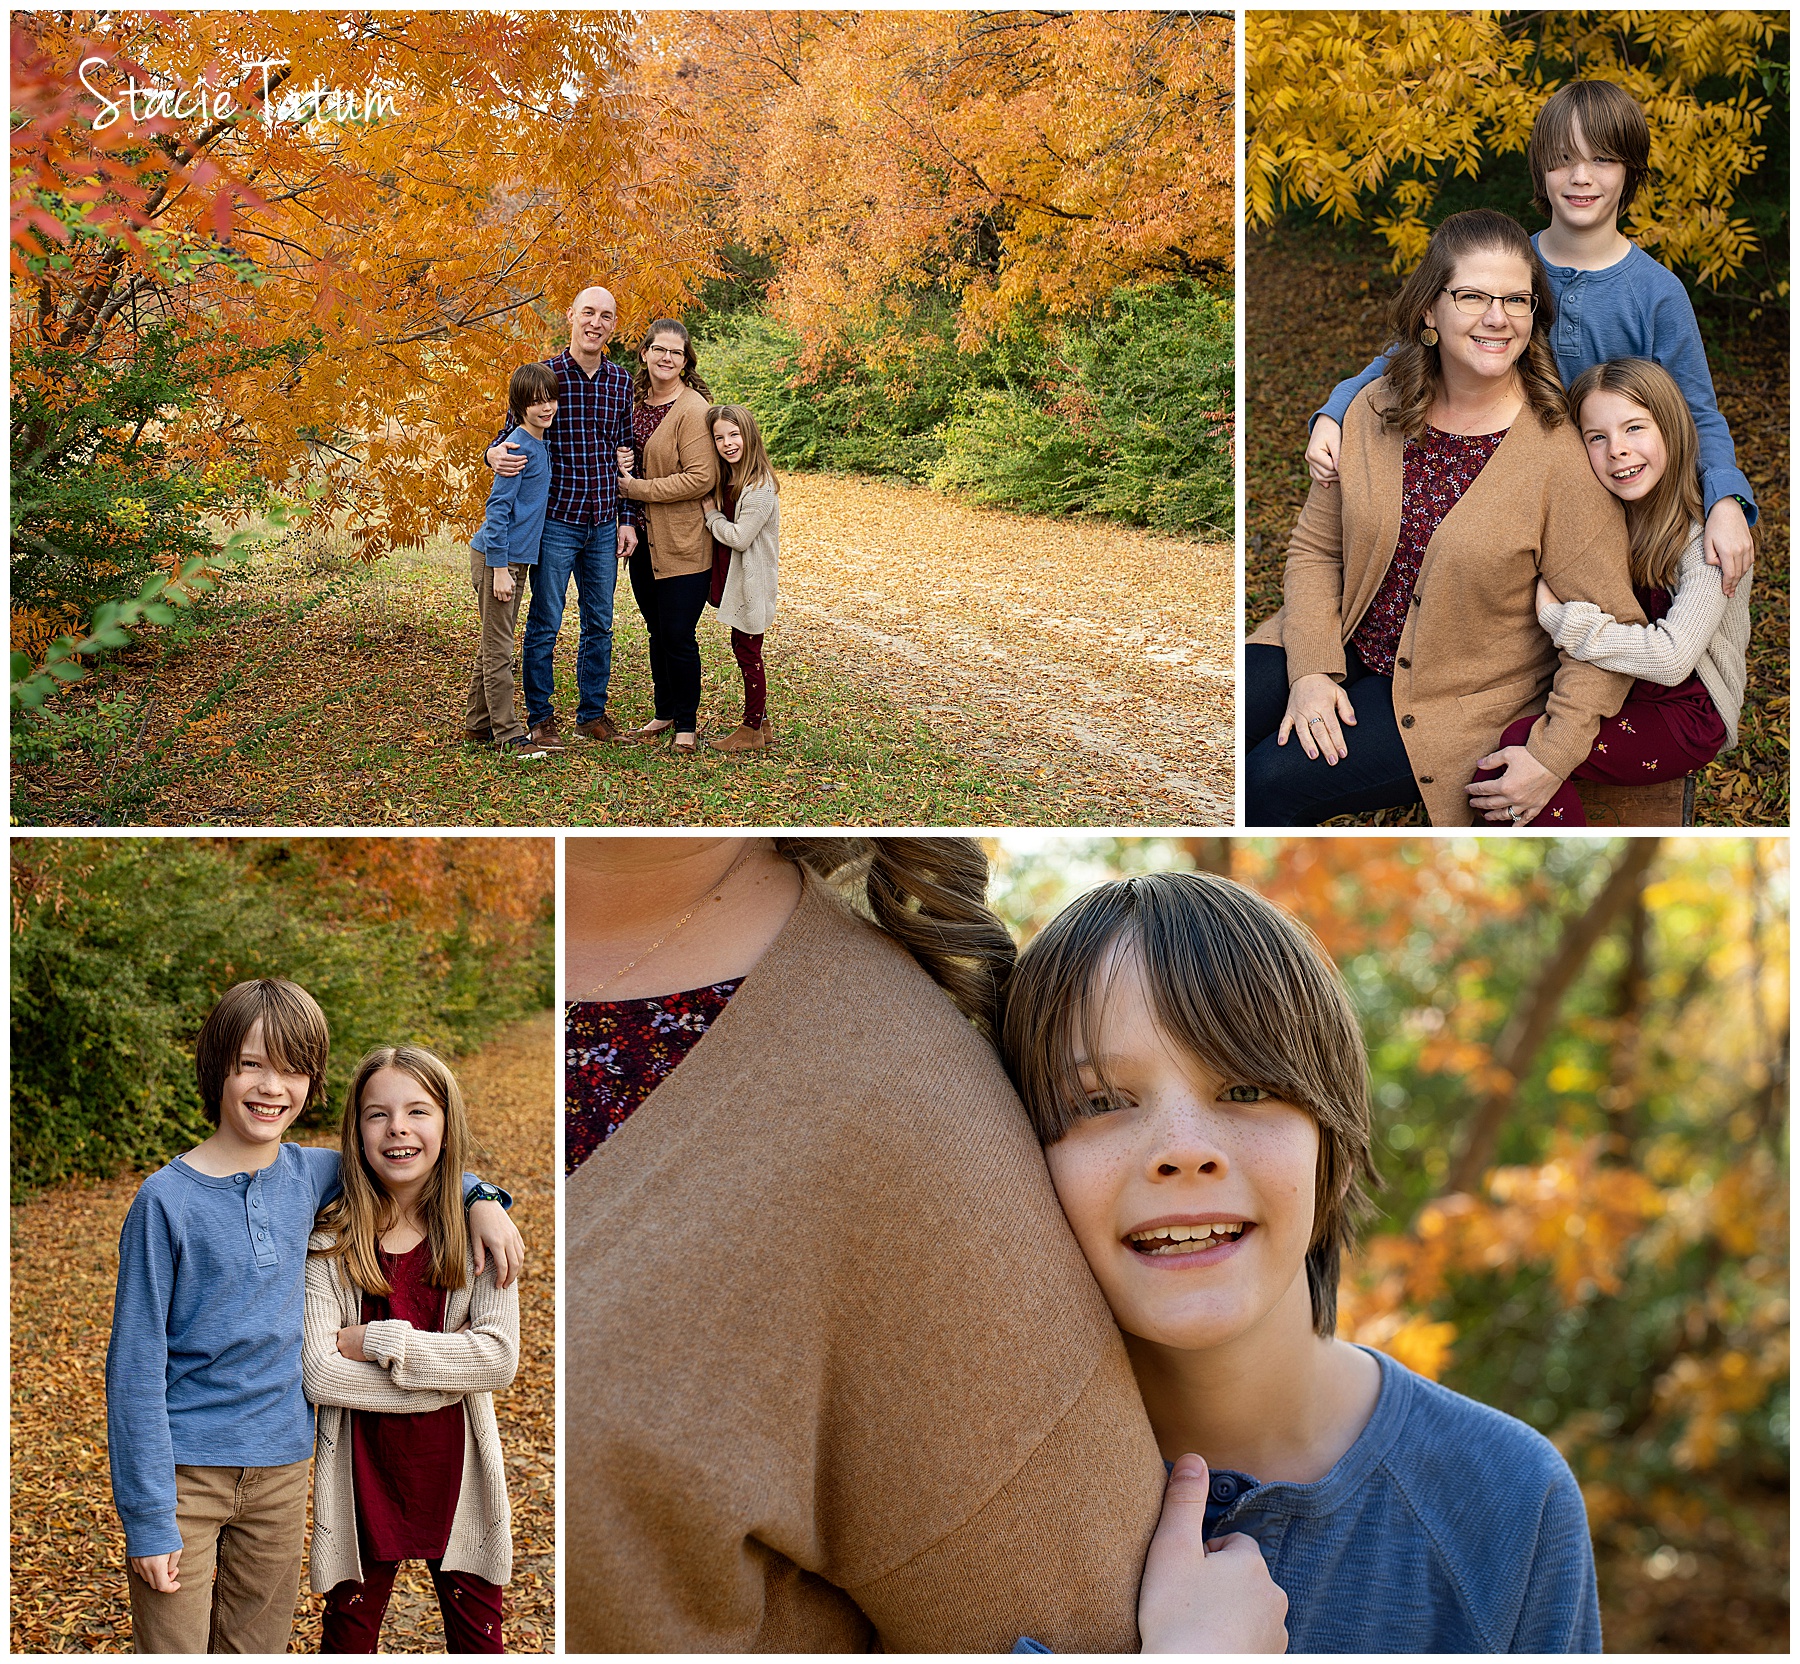 Dallas Fun Family Fall Session with colorful leaves.jpg